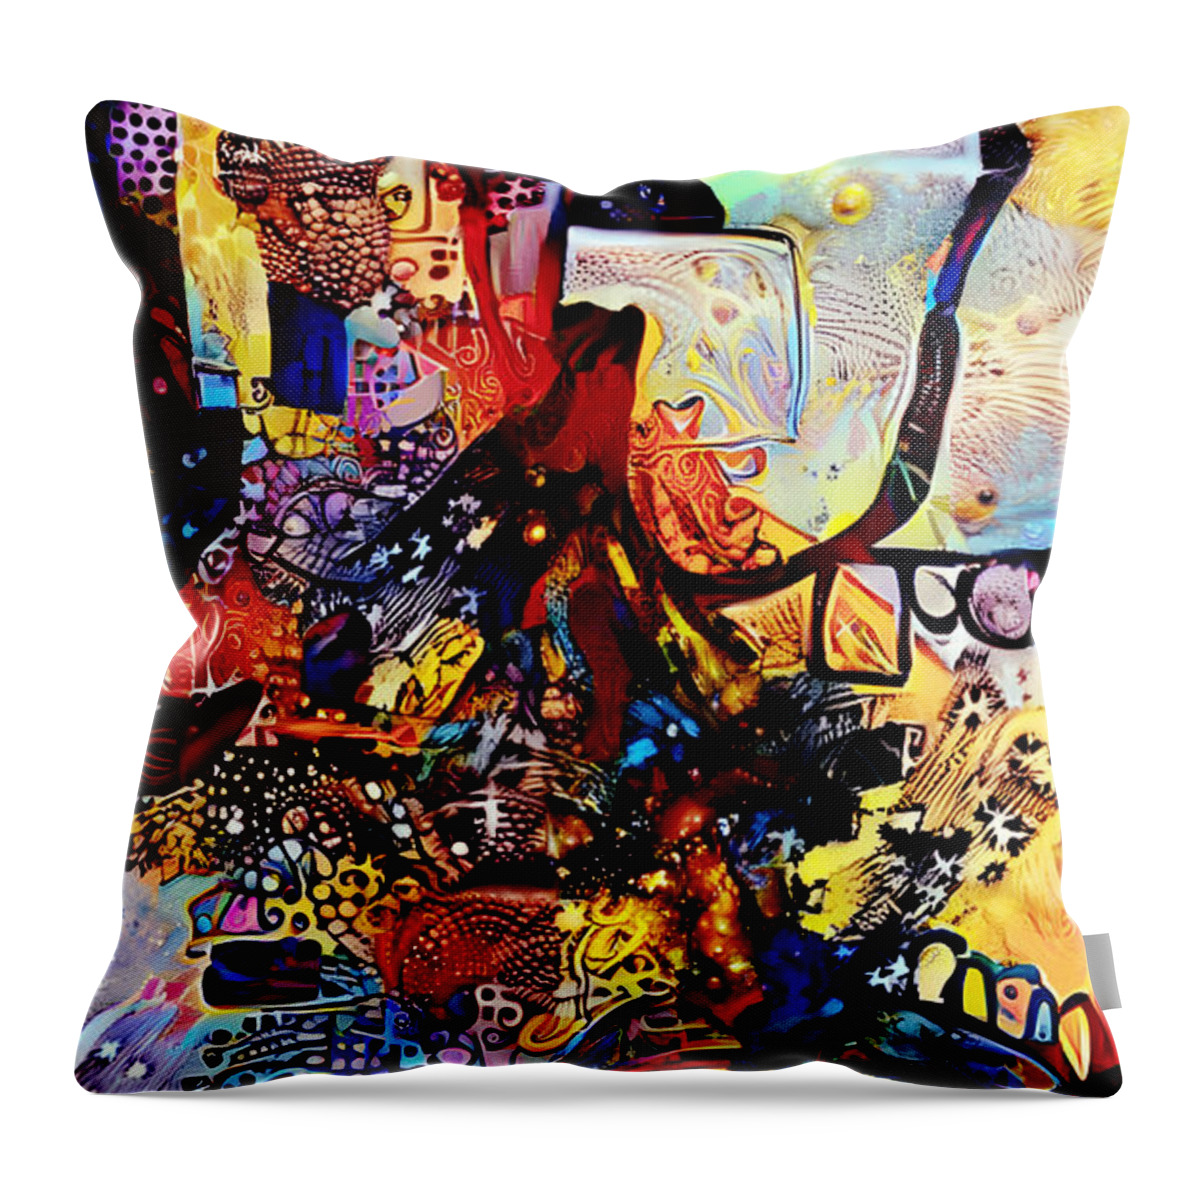 Contemporary Art Throw Pillow featuring the digital art 2 by Jeremiah Ray